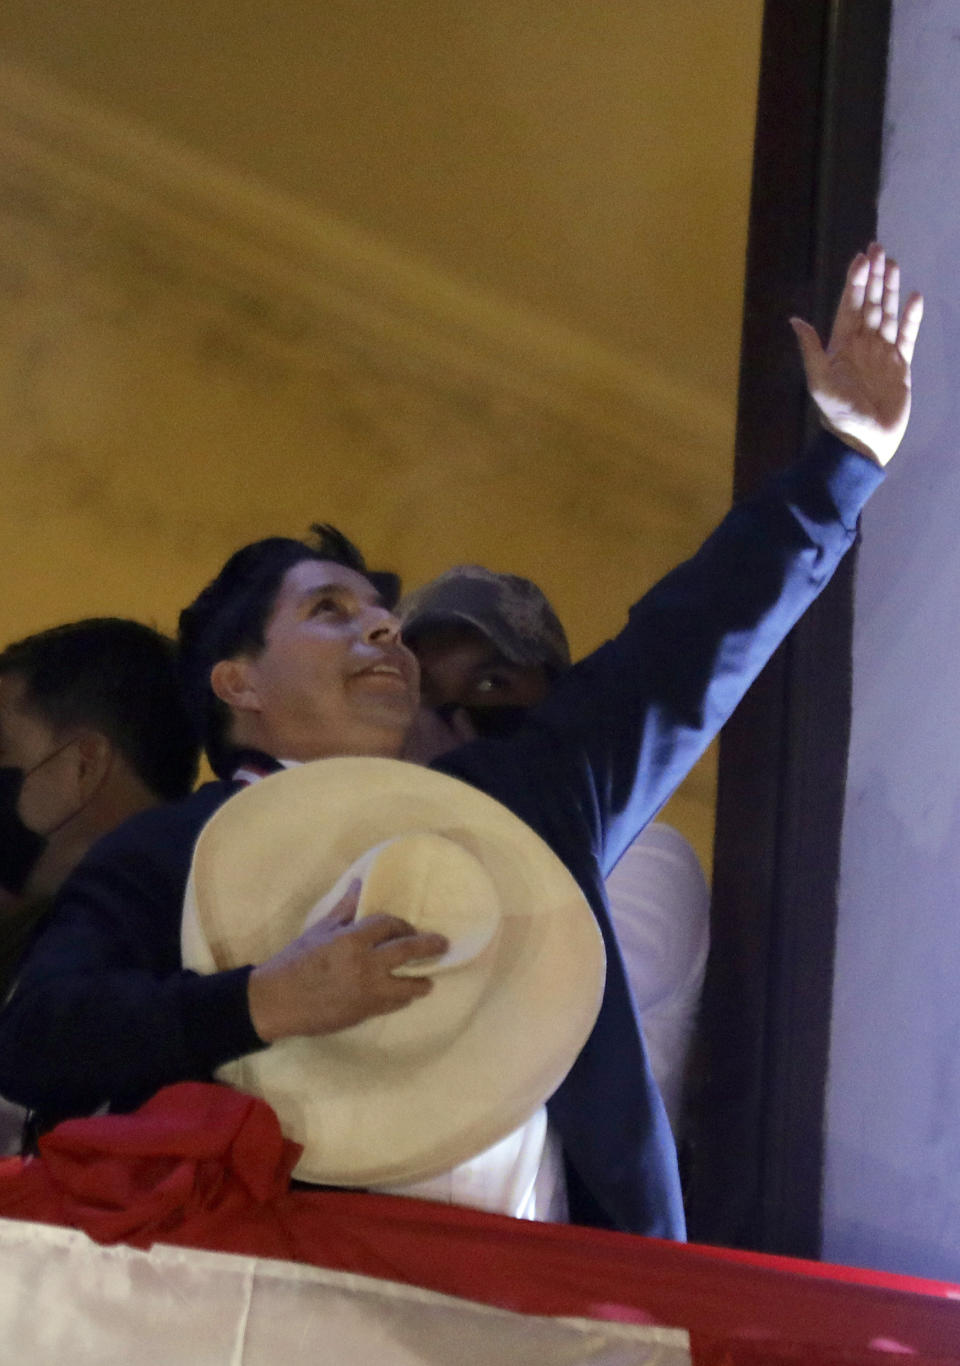 Pedro Castillo celebrates after being declared president-elect by election authorities, at his campaign headquarters in Lima, Peru, Monday, July 19, 2021. Castillo was declared president more than a month after elections took place and after opponent Keiko Fujimori claimed that the election was tainted by fraud. (AP Photo/Guadalupe Prado)